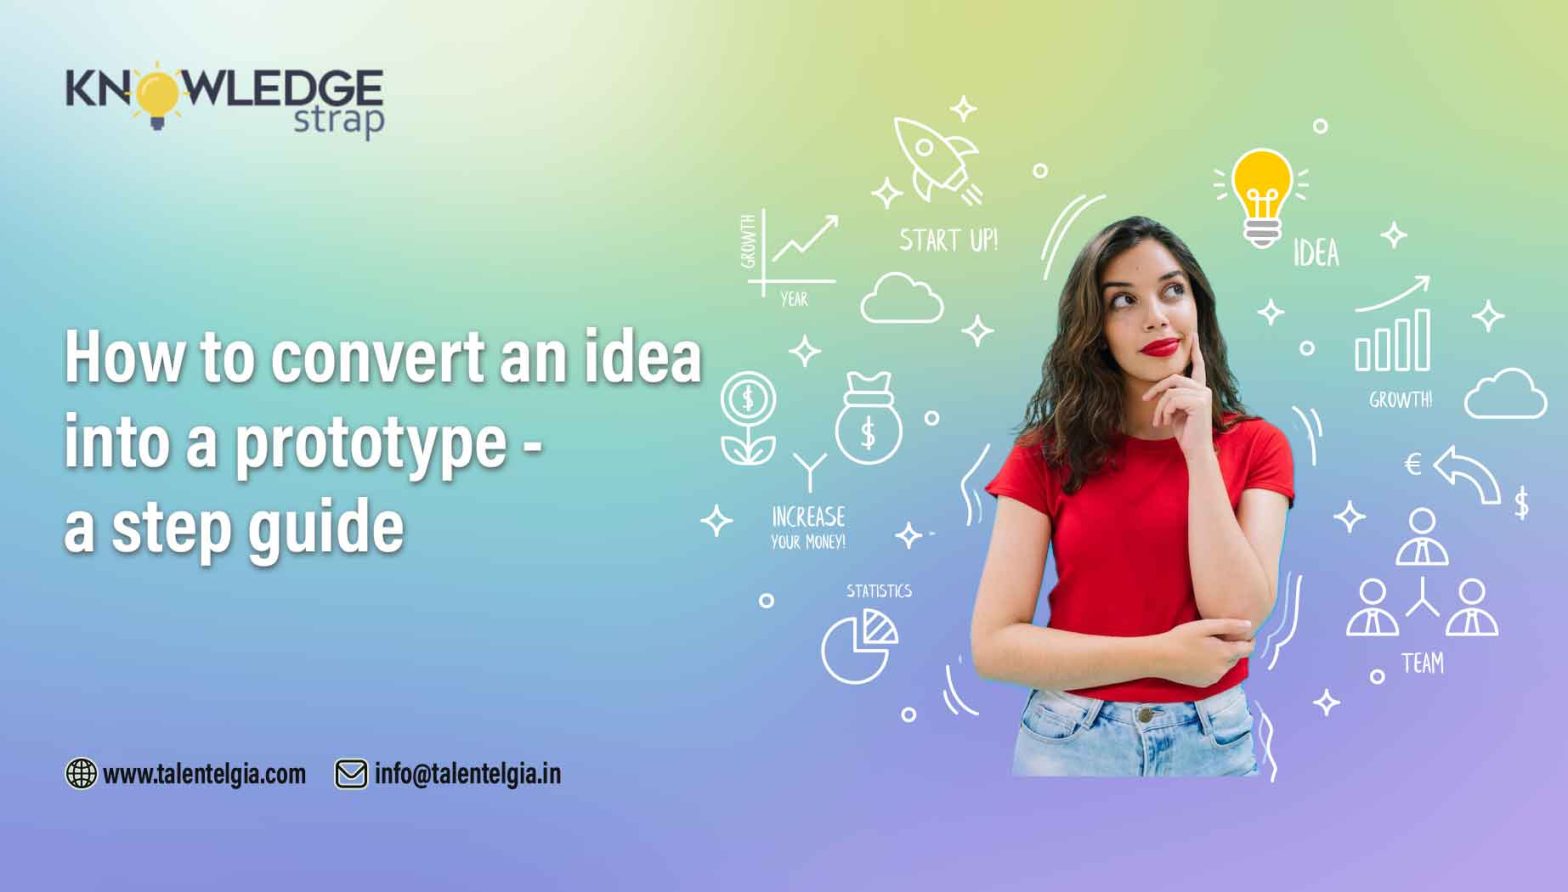 How to convert an idea into a prototype - a step guide